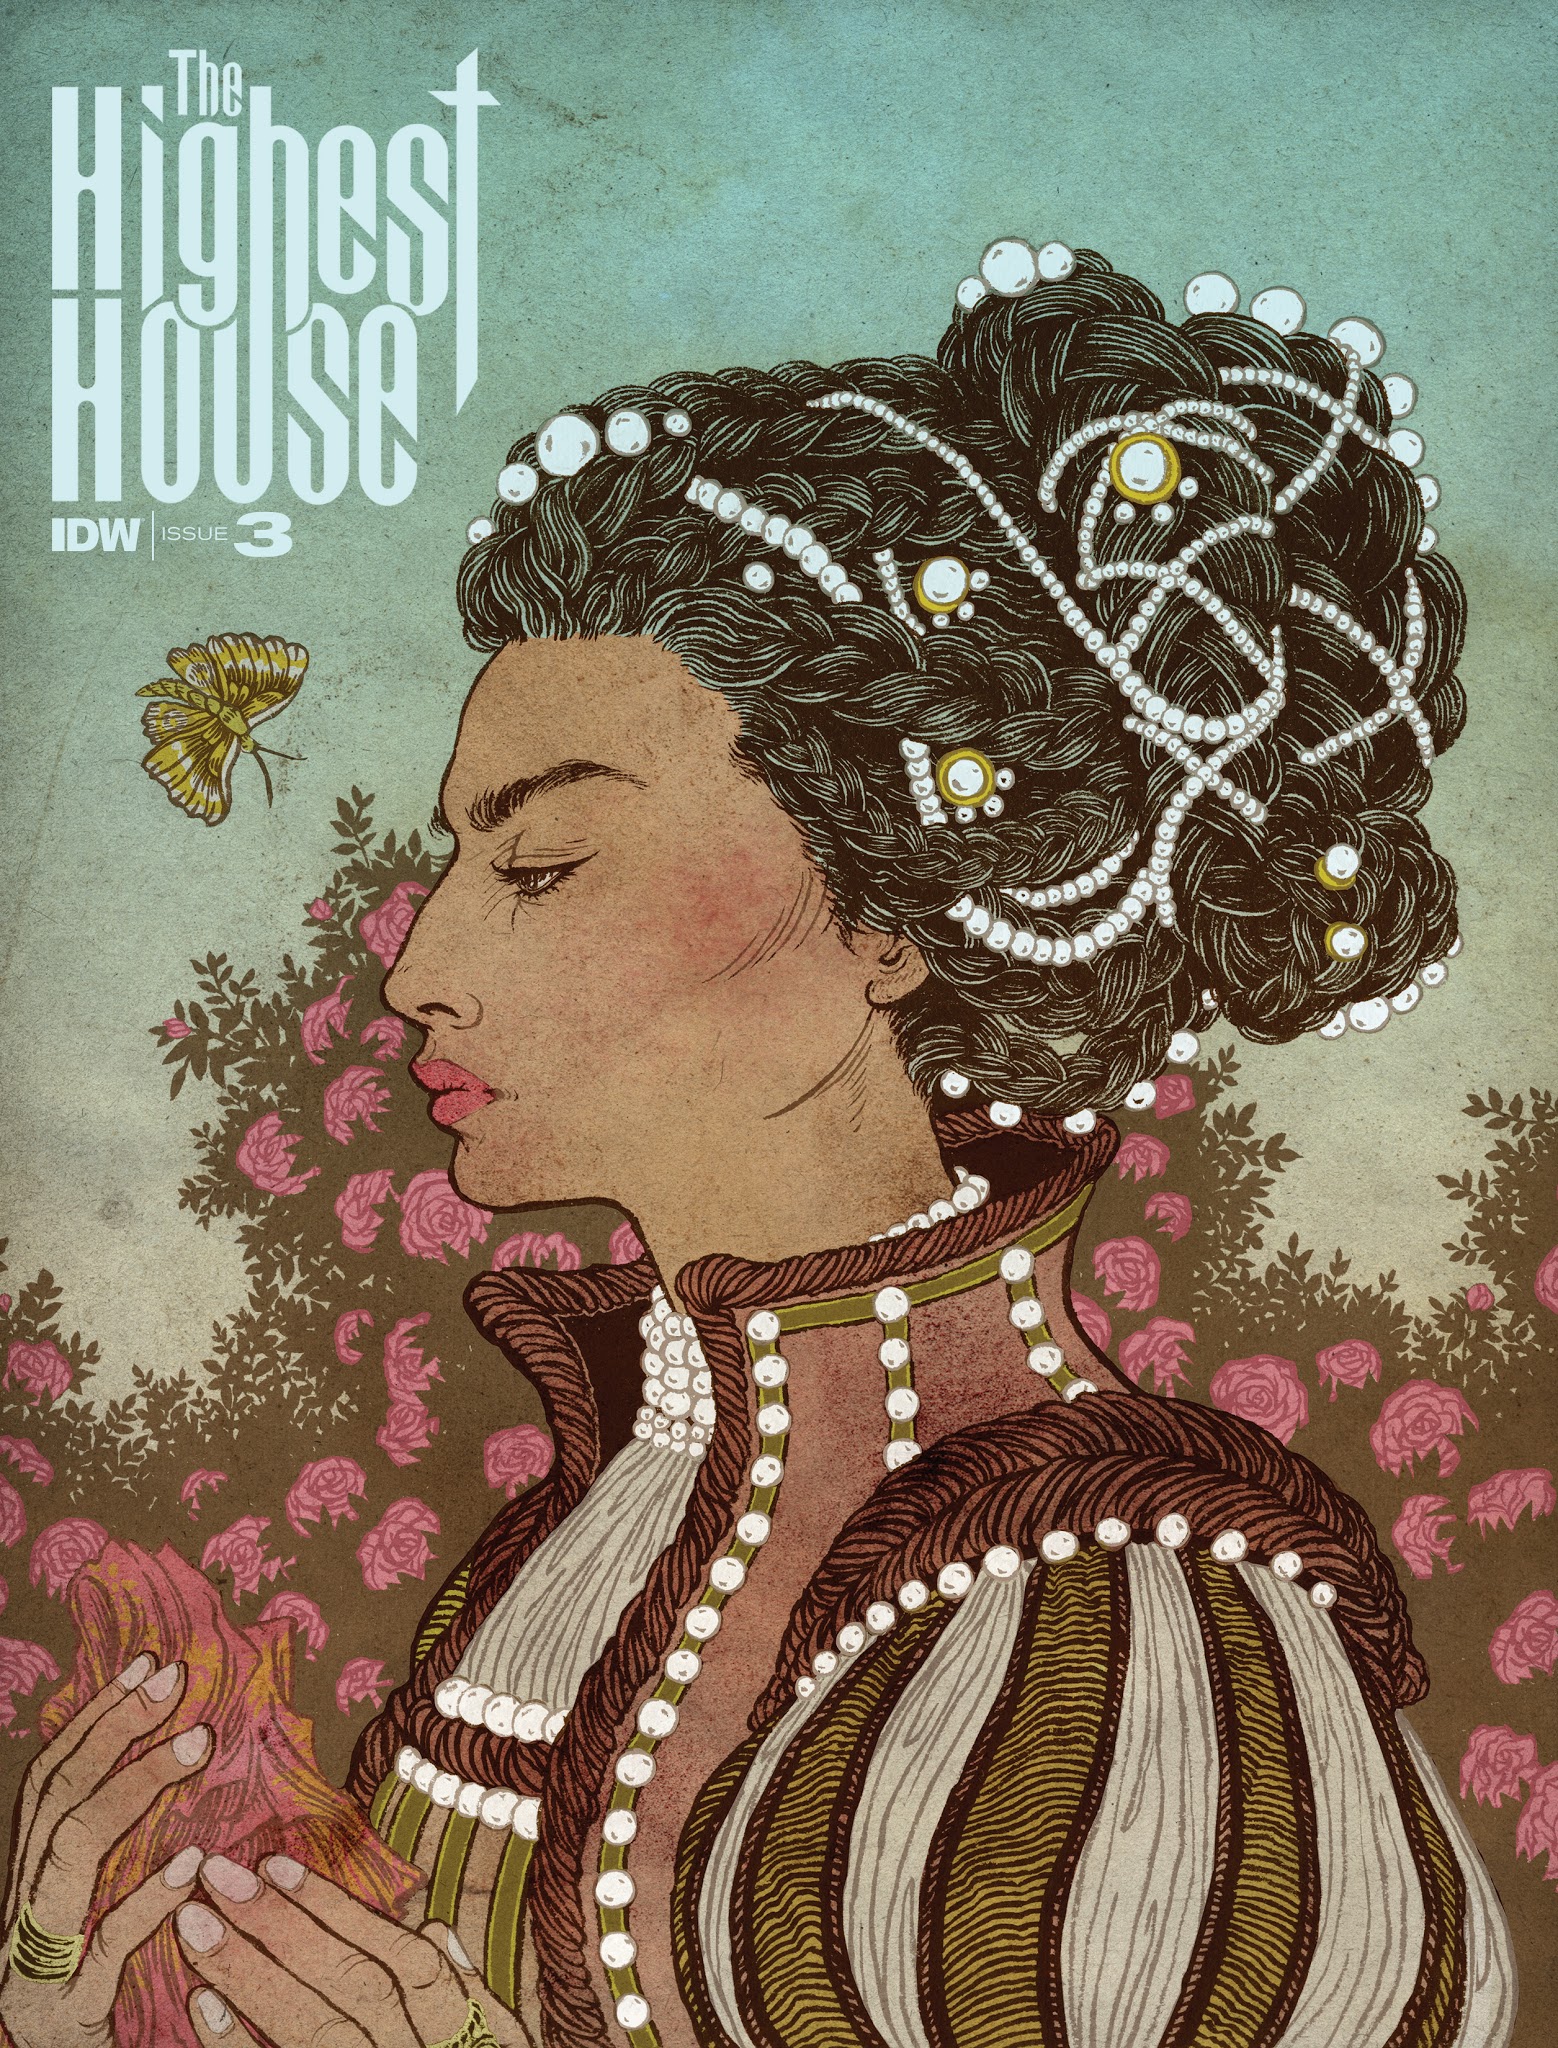 Read online The Highest House comic -  Issue #3 - 1